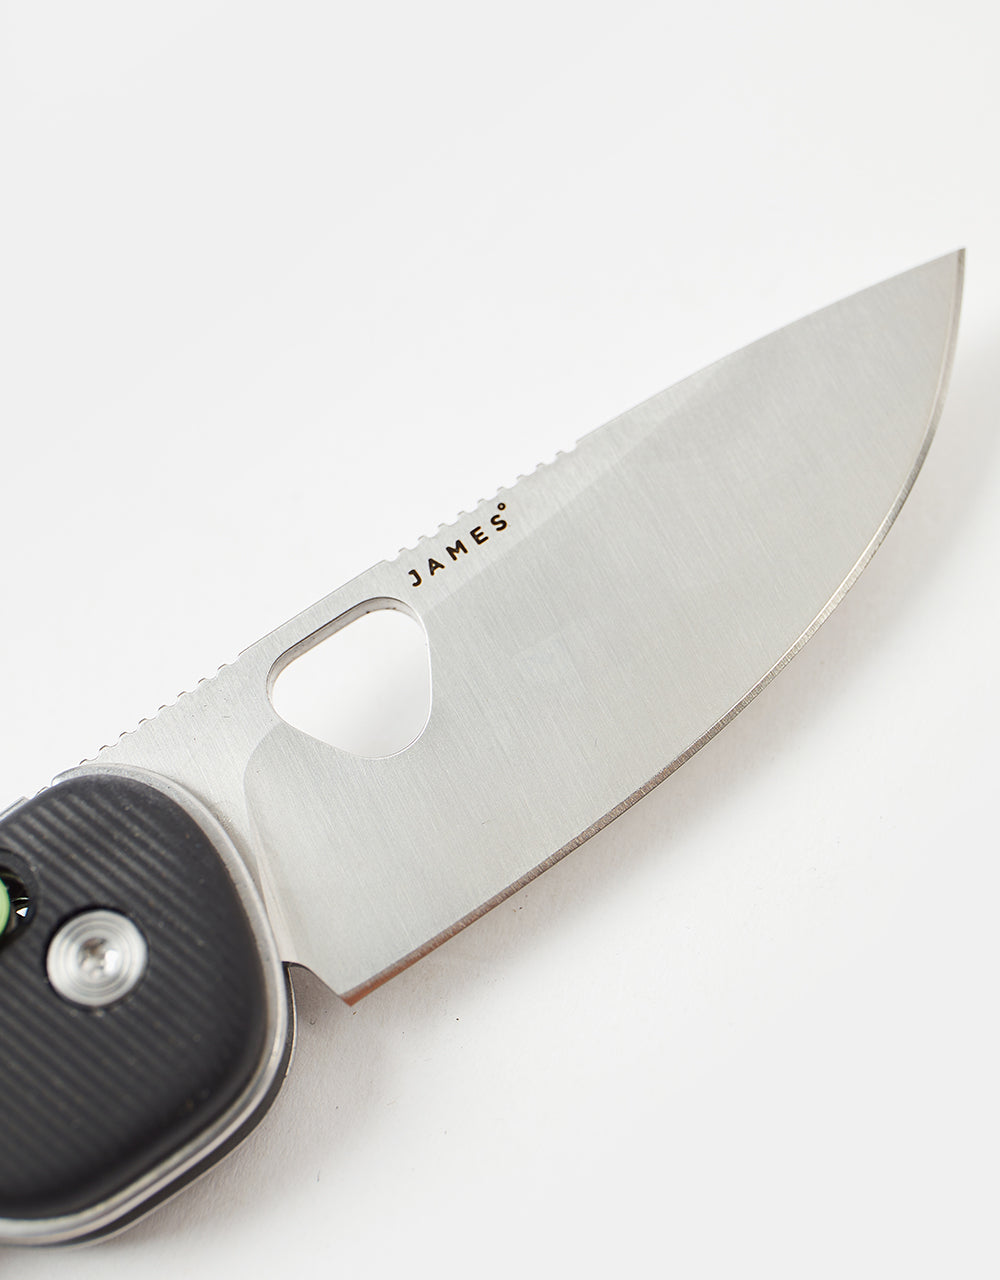 James The Redstone Adventure Knife - Black/Stainless/Straight